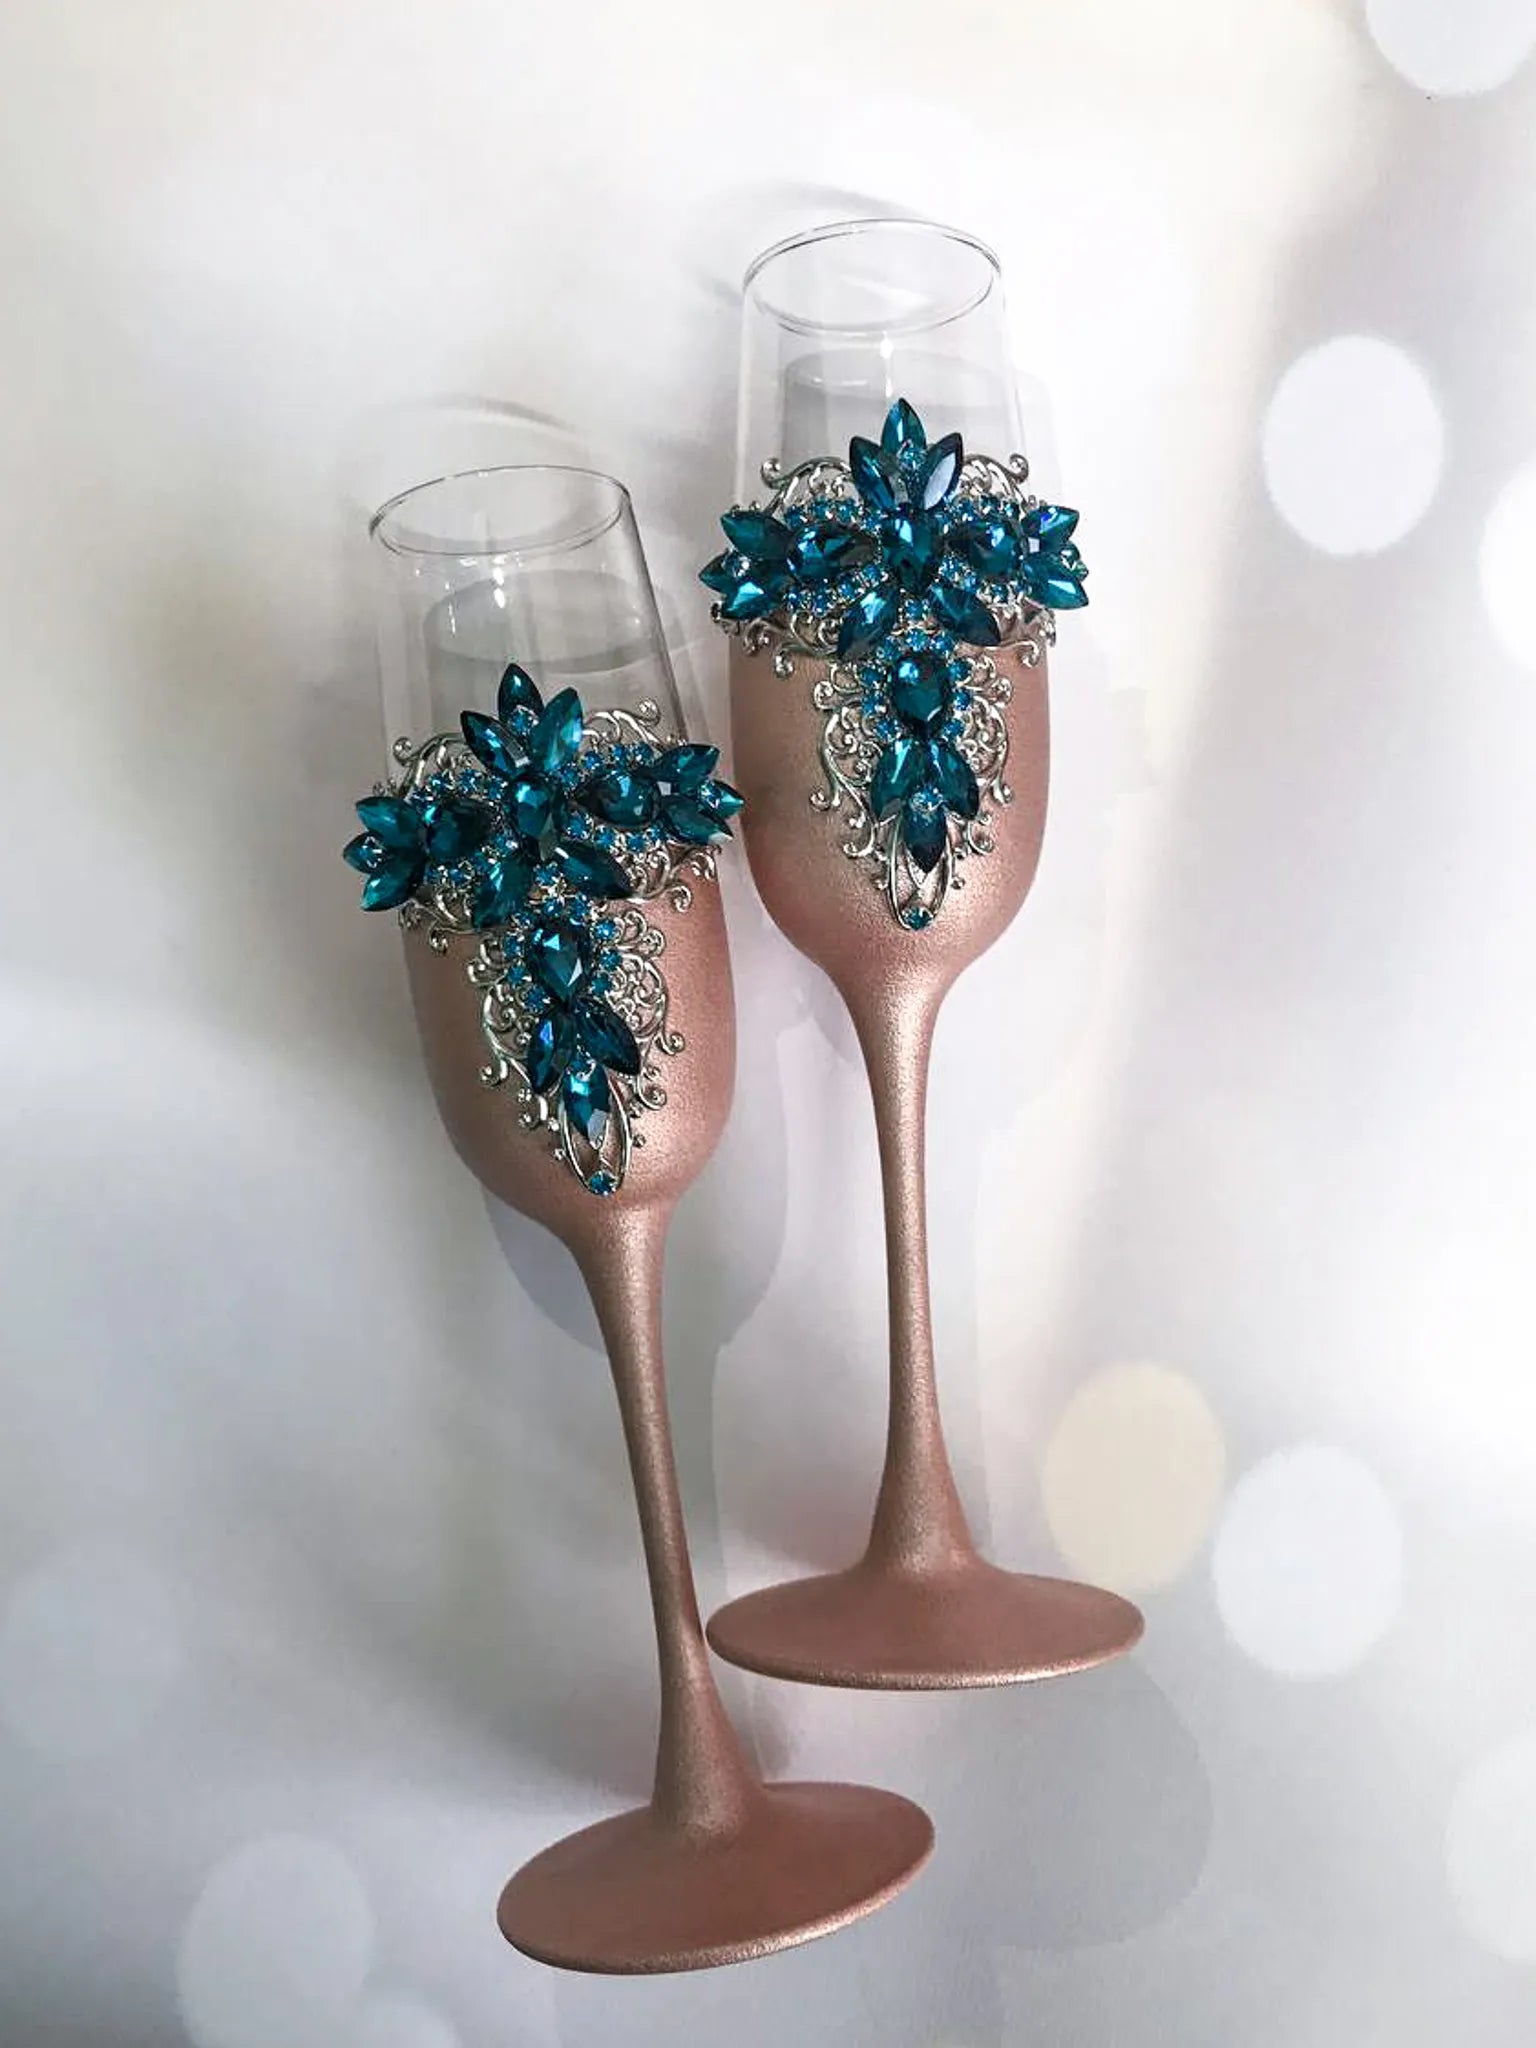 Special occasion champagne glasses with silver accents